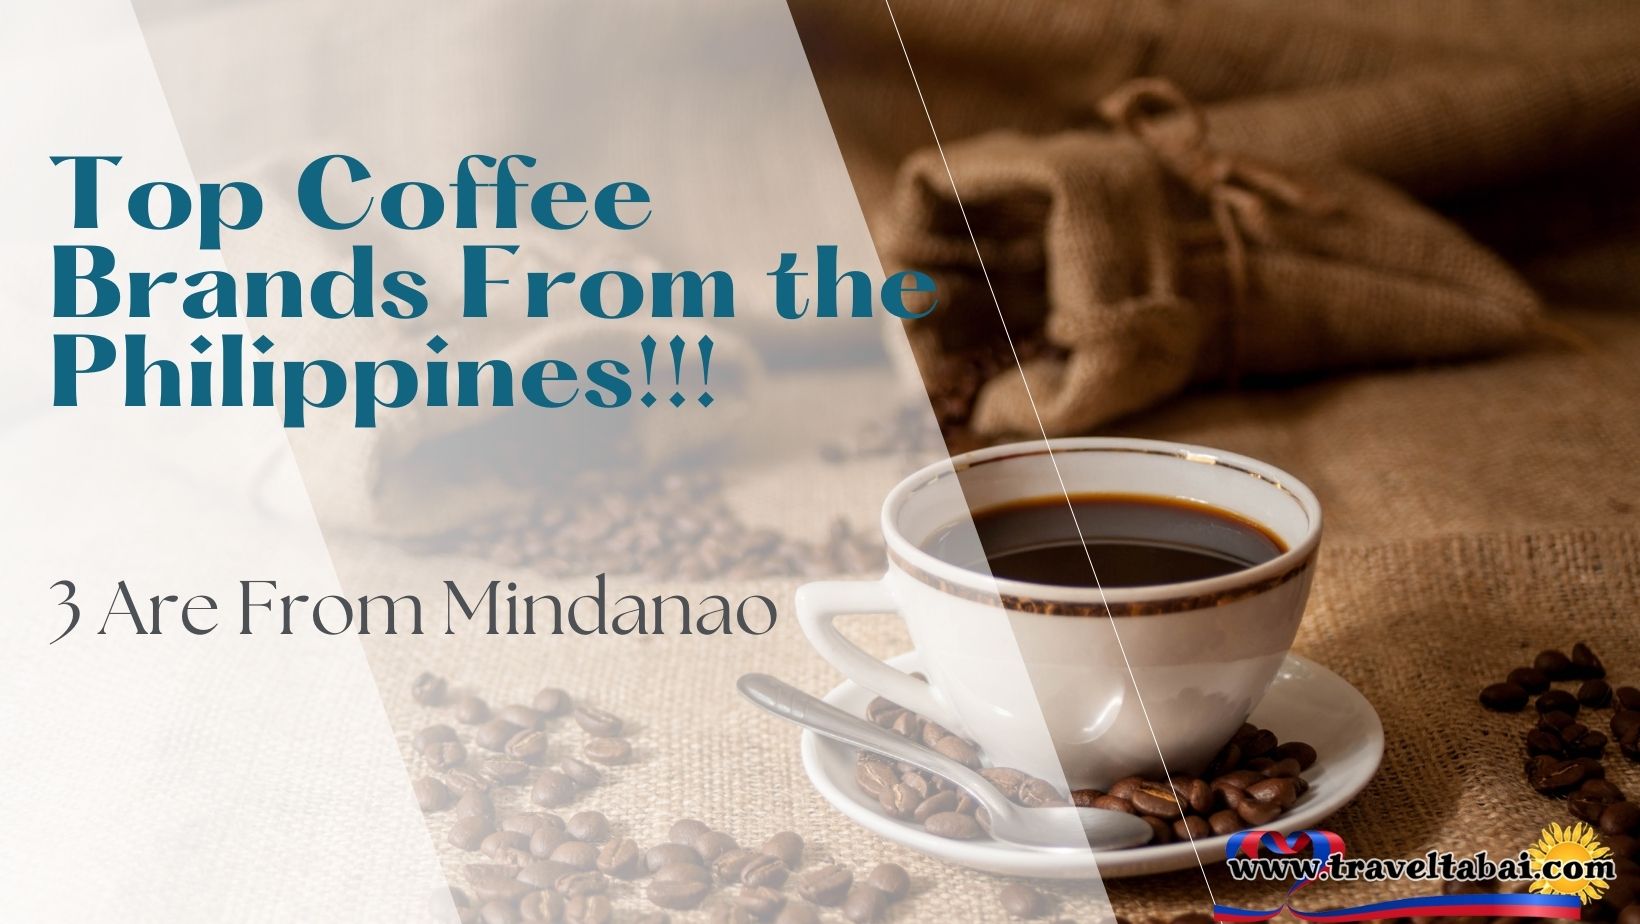 https://www.traveltabai.com/wp-content/uploads/2021/12/Top-Coffee-Brands-From-the-Philippines.jpg